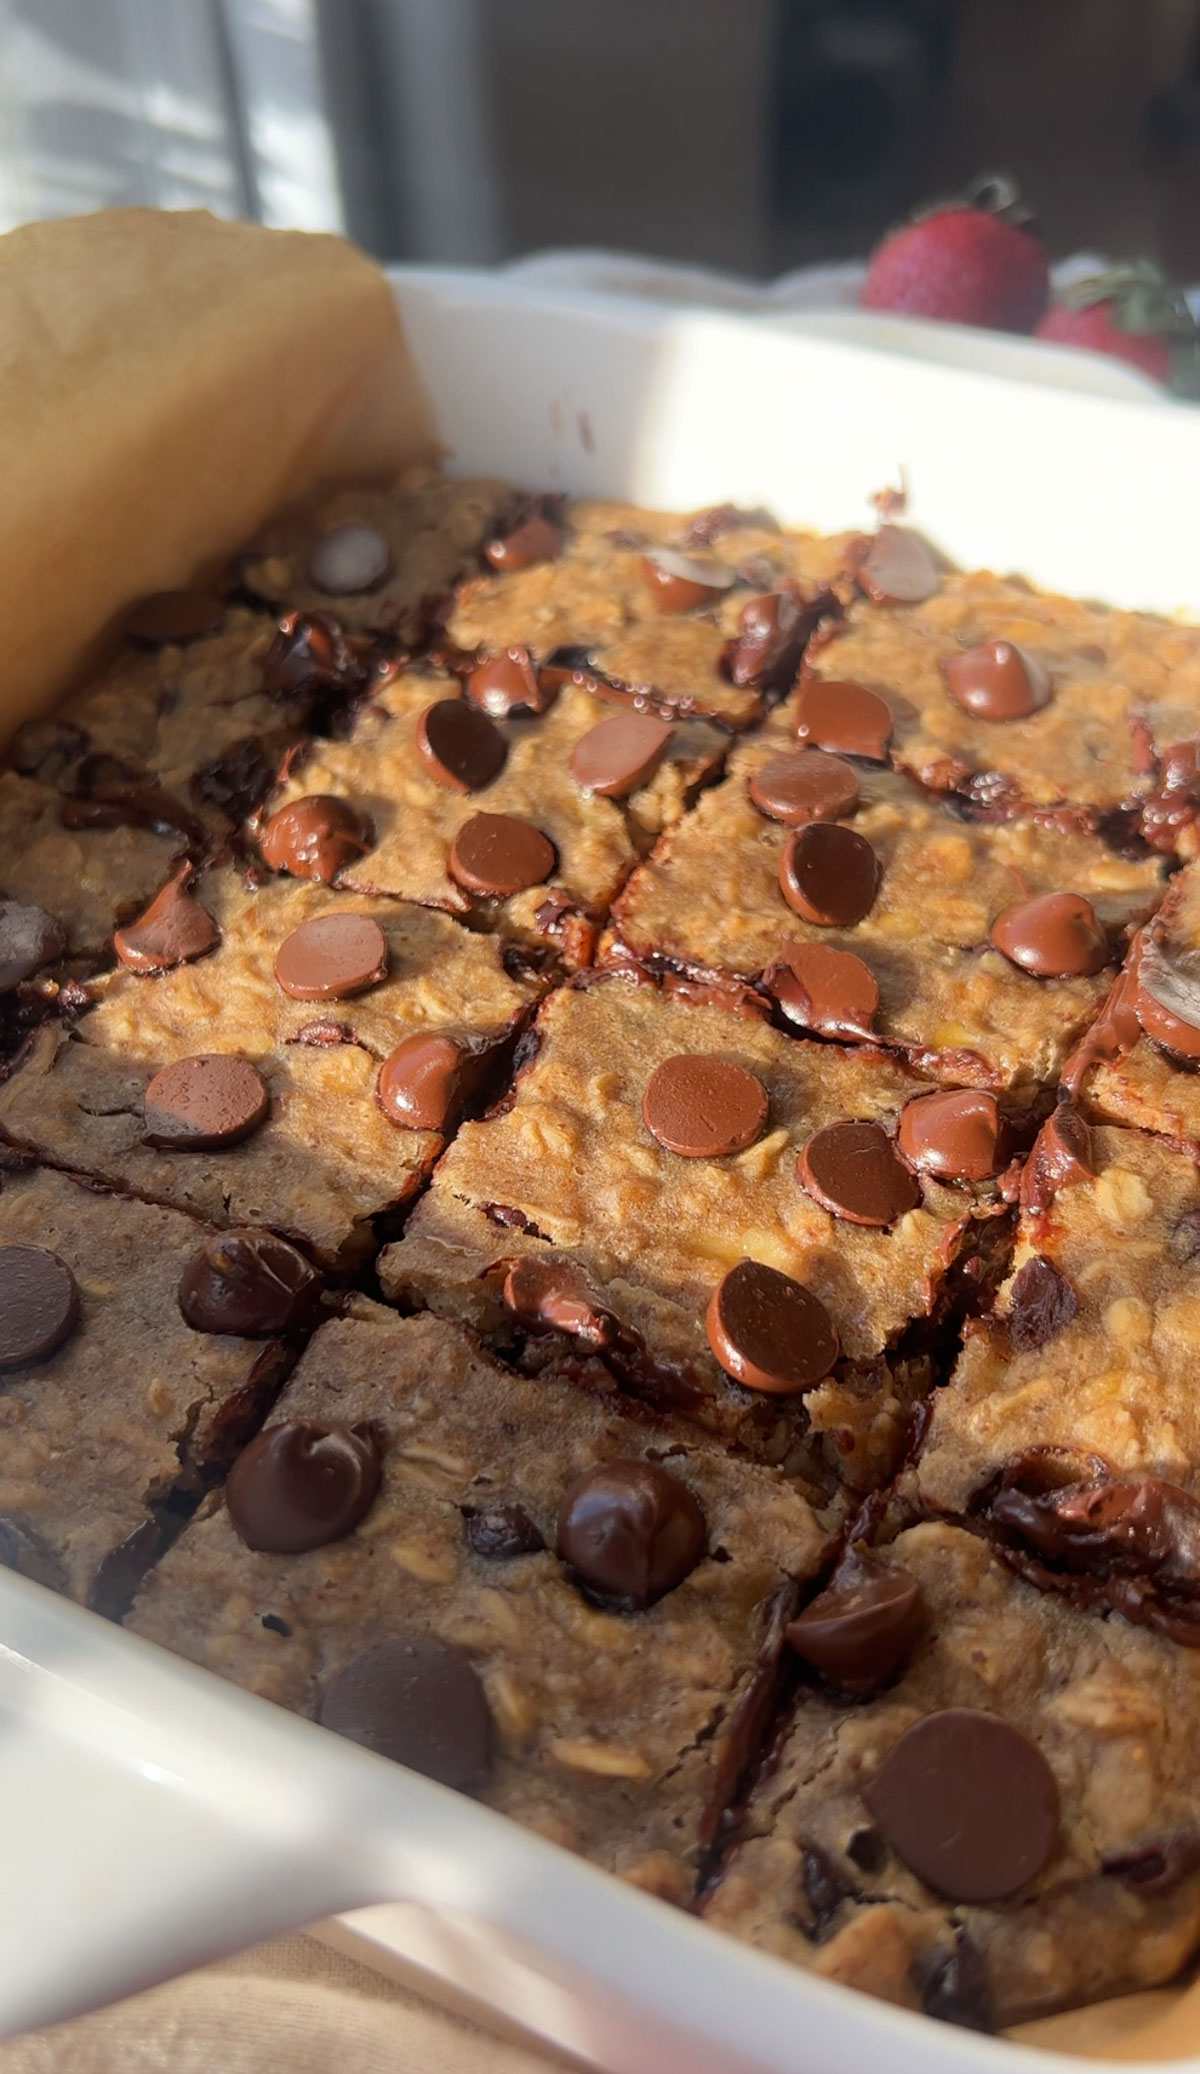 Vegan baked oat bars cut into squares in a baking dish.